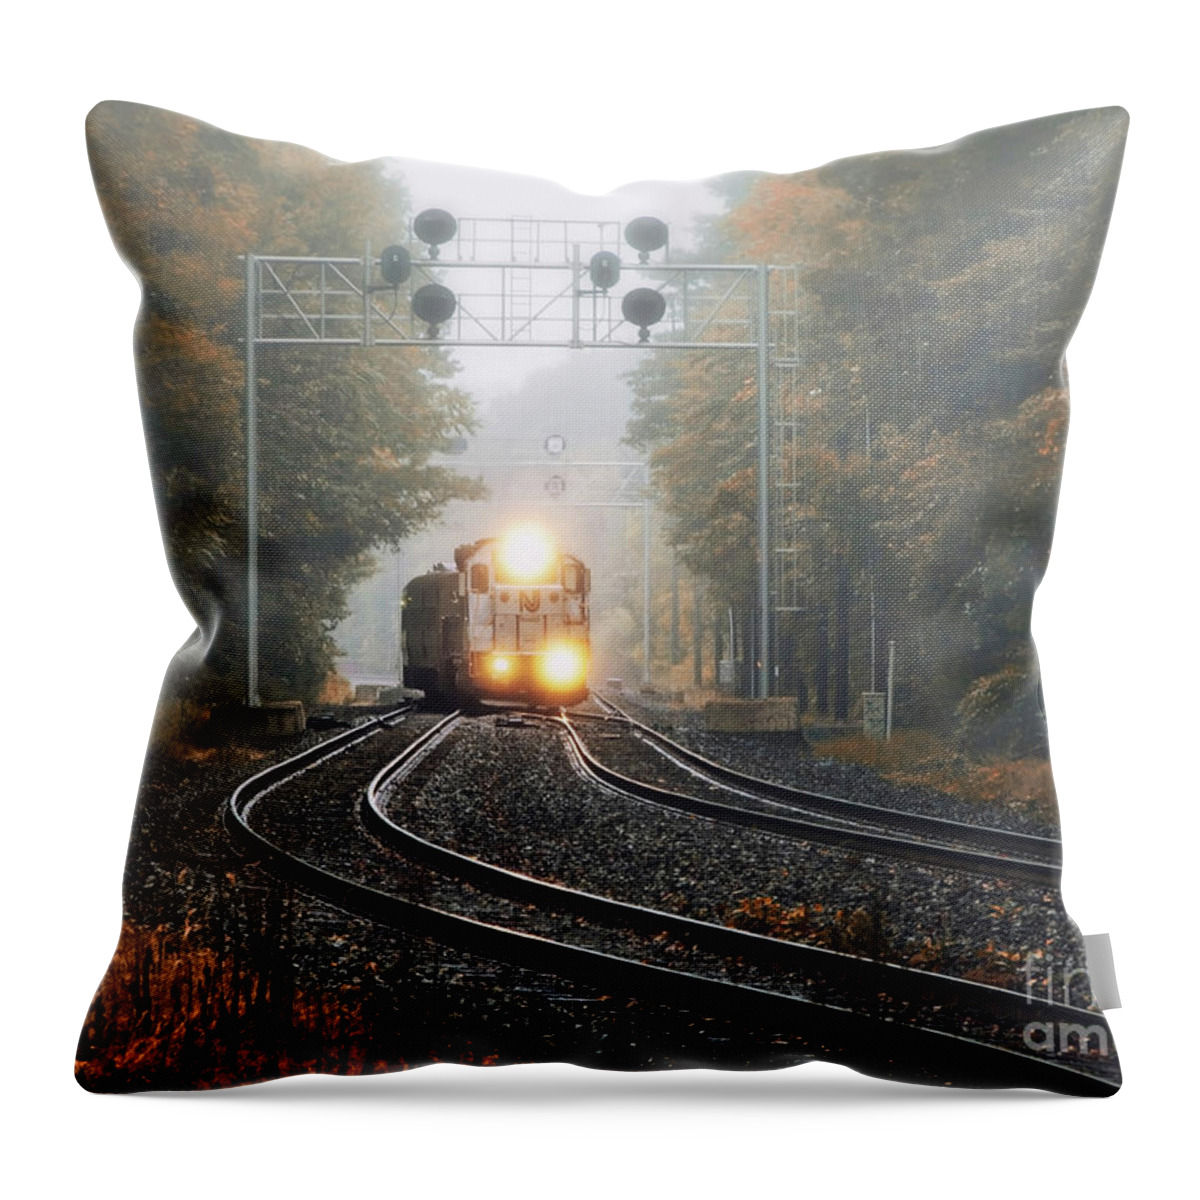 Transit Throw Pillow featuring the photograph Switching Tracks by Mark Miller